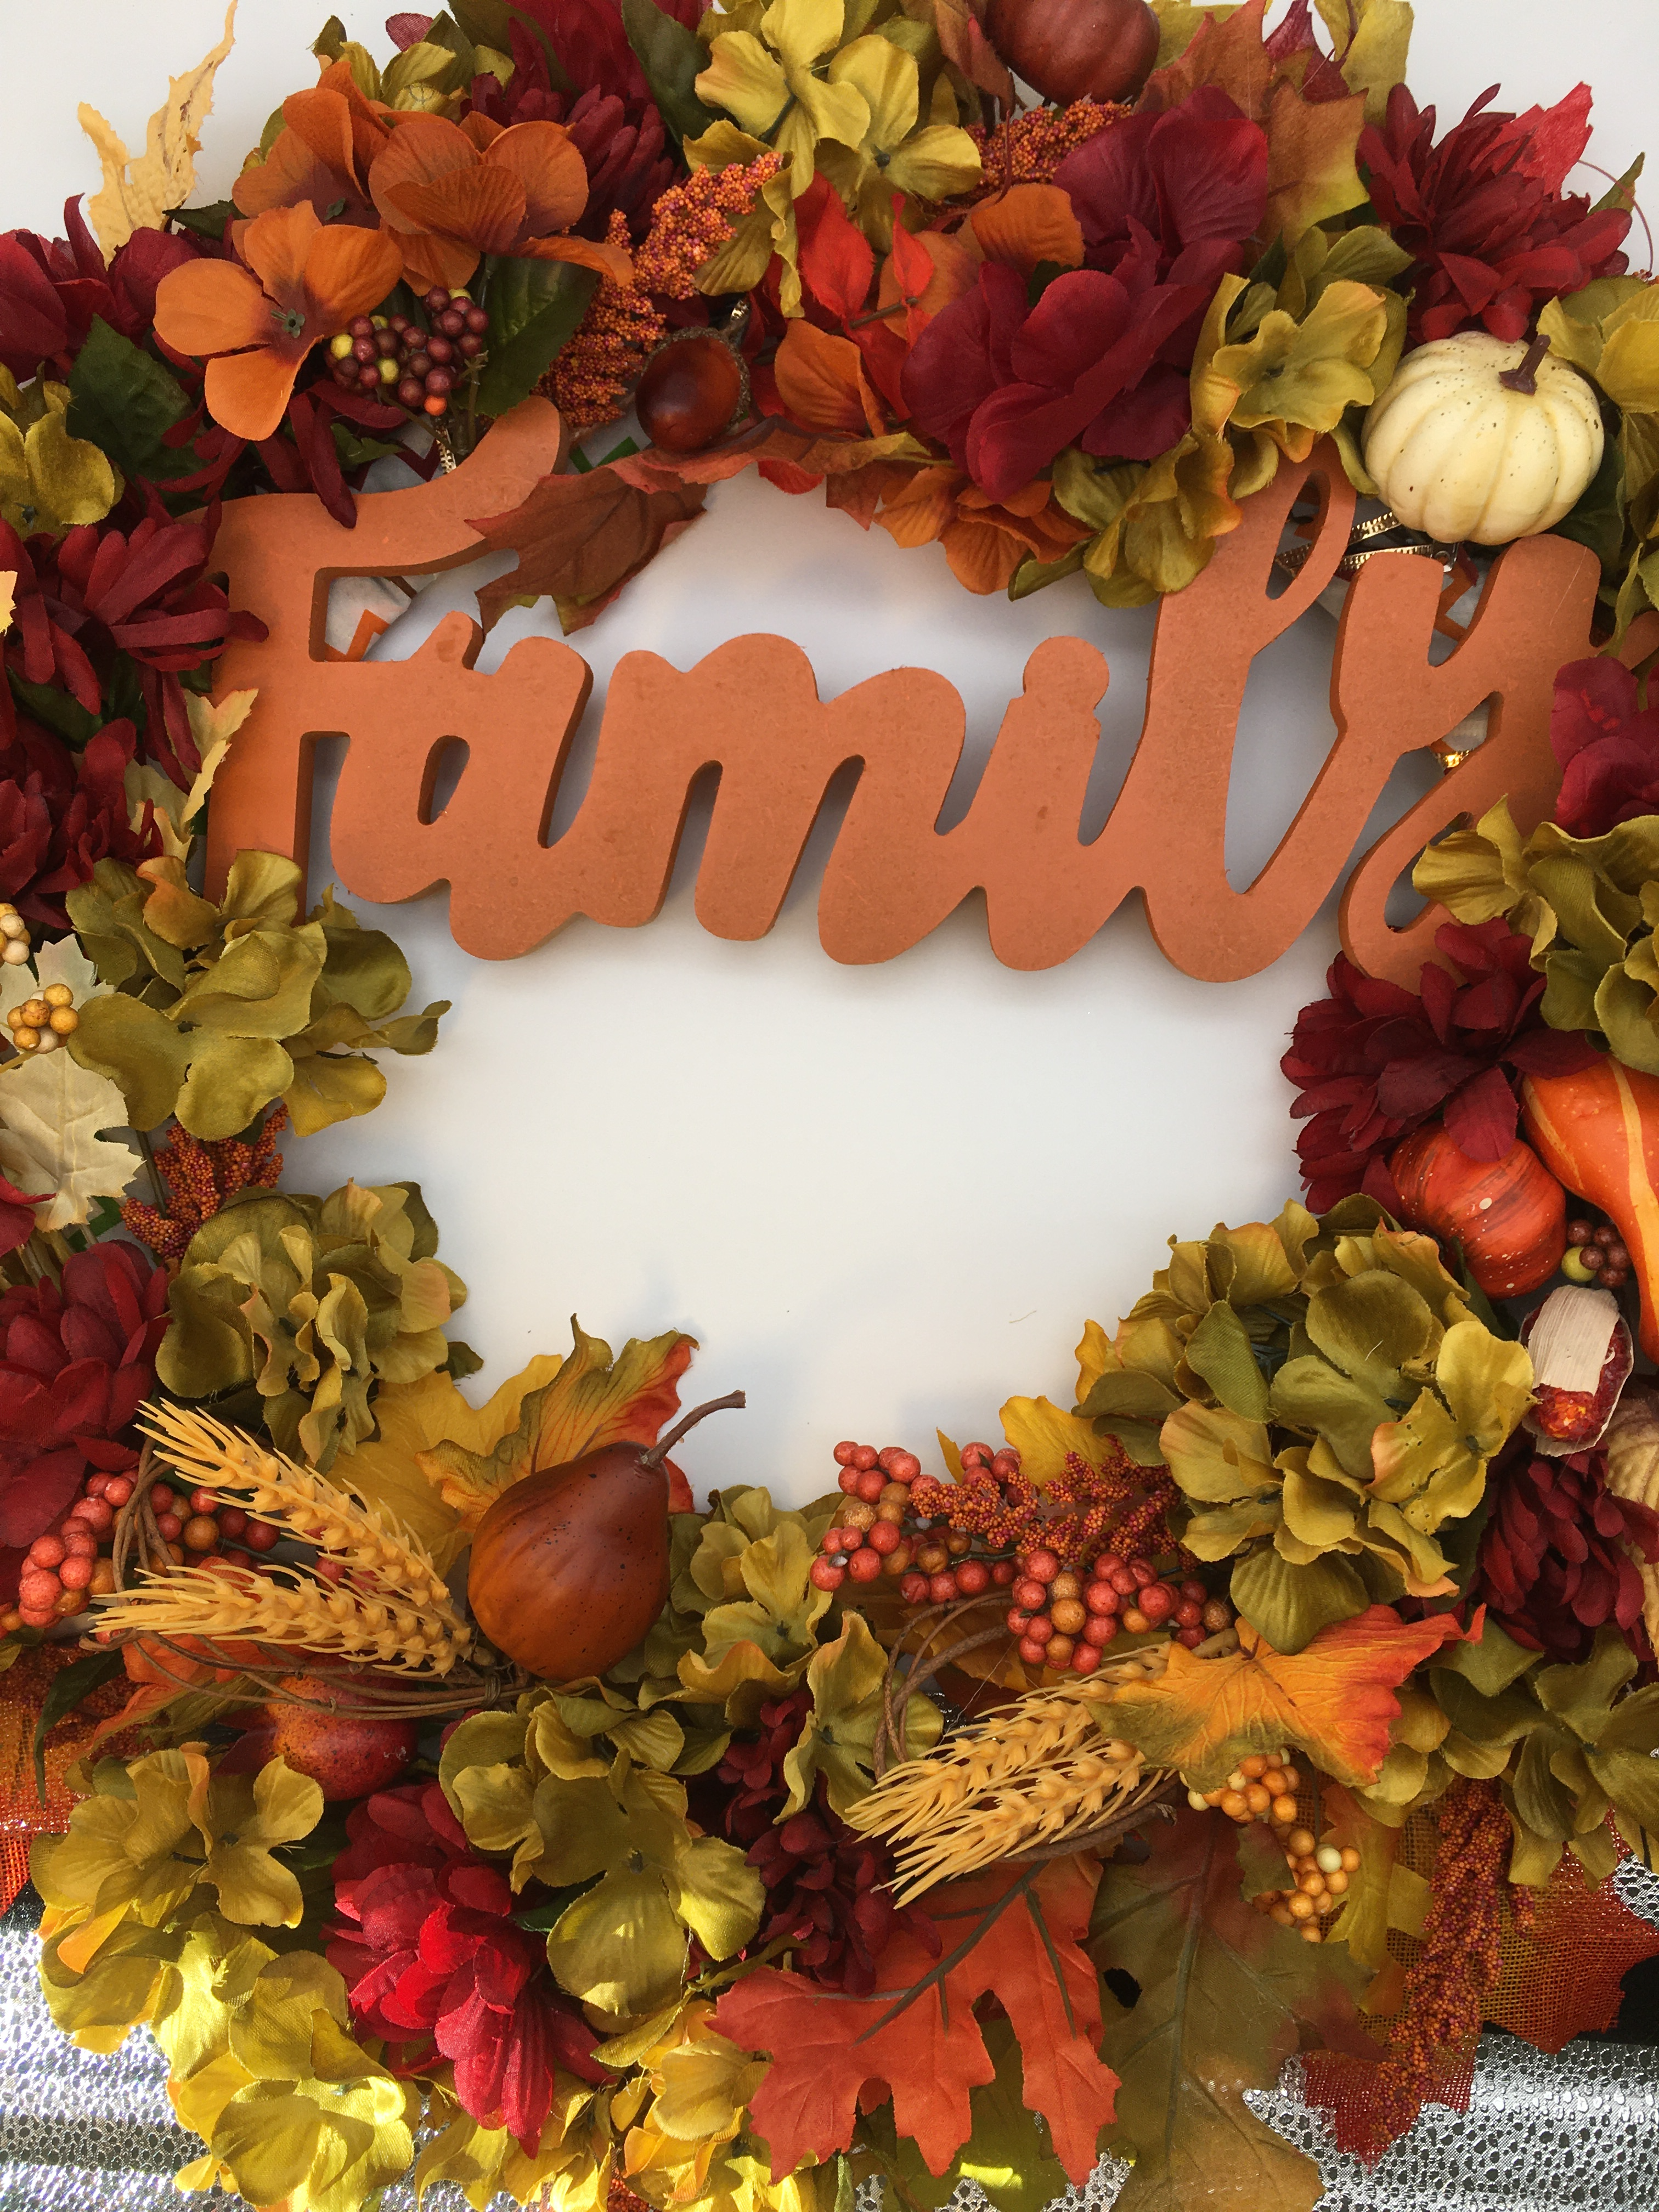 Thanksgiving "Family" Sign Wreath 24"